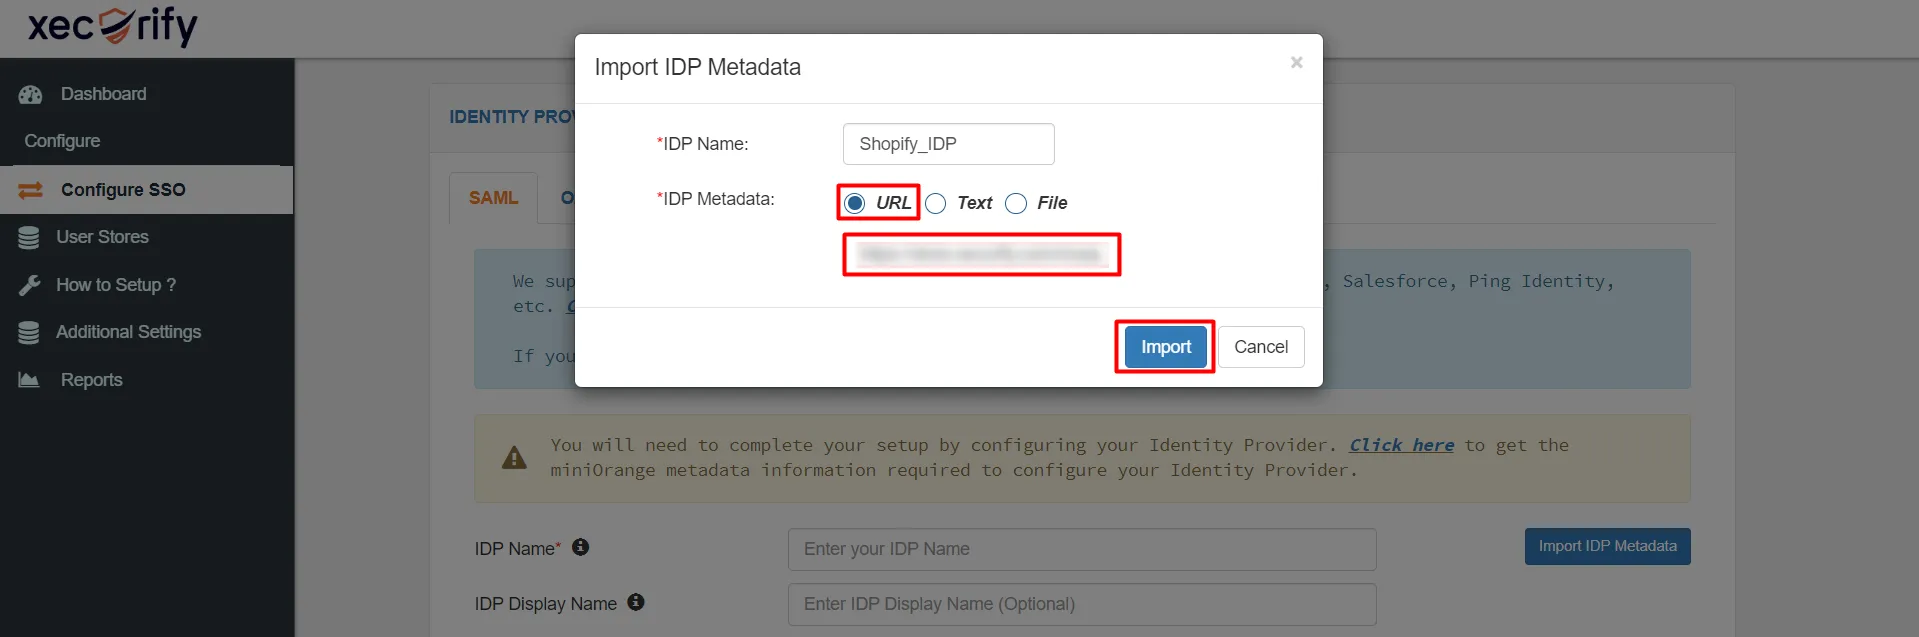 SSO between Two Shopify Stores - Shopify as IDP - Upload metadata